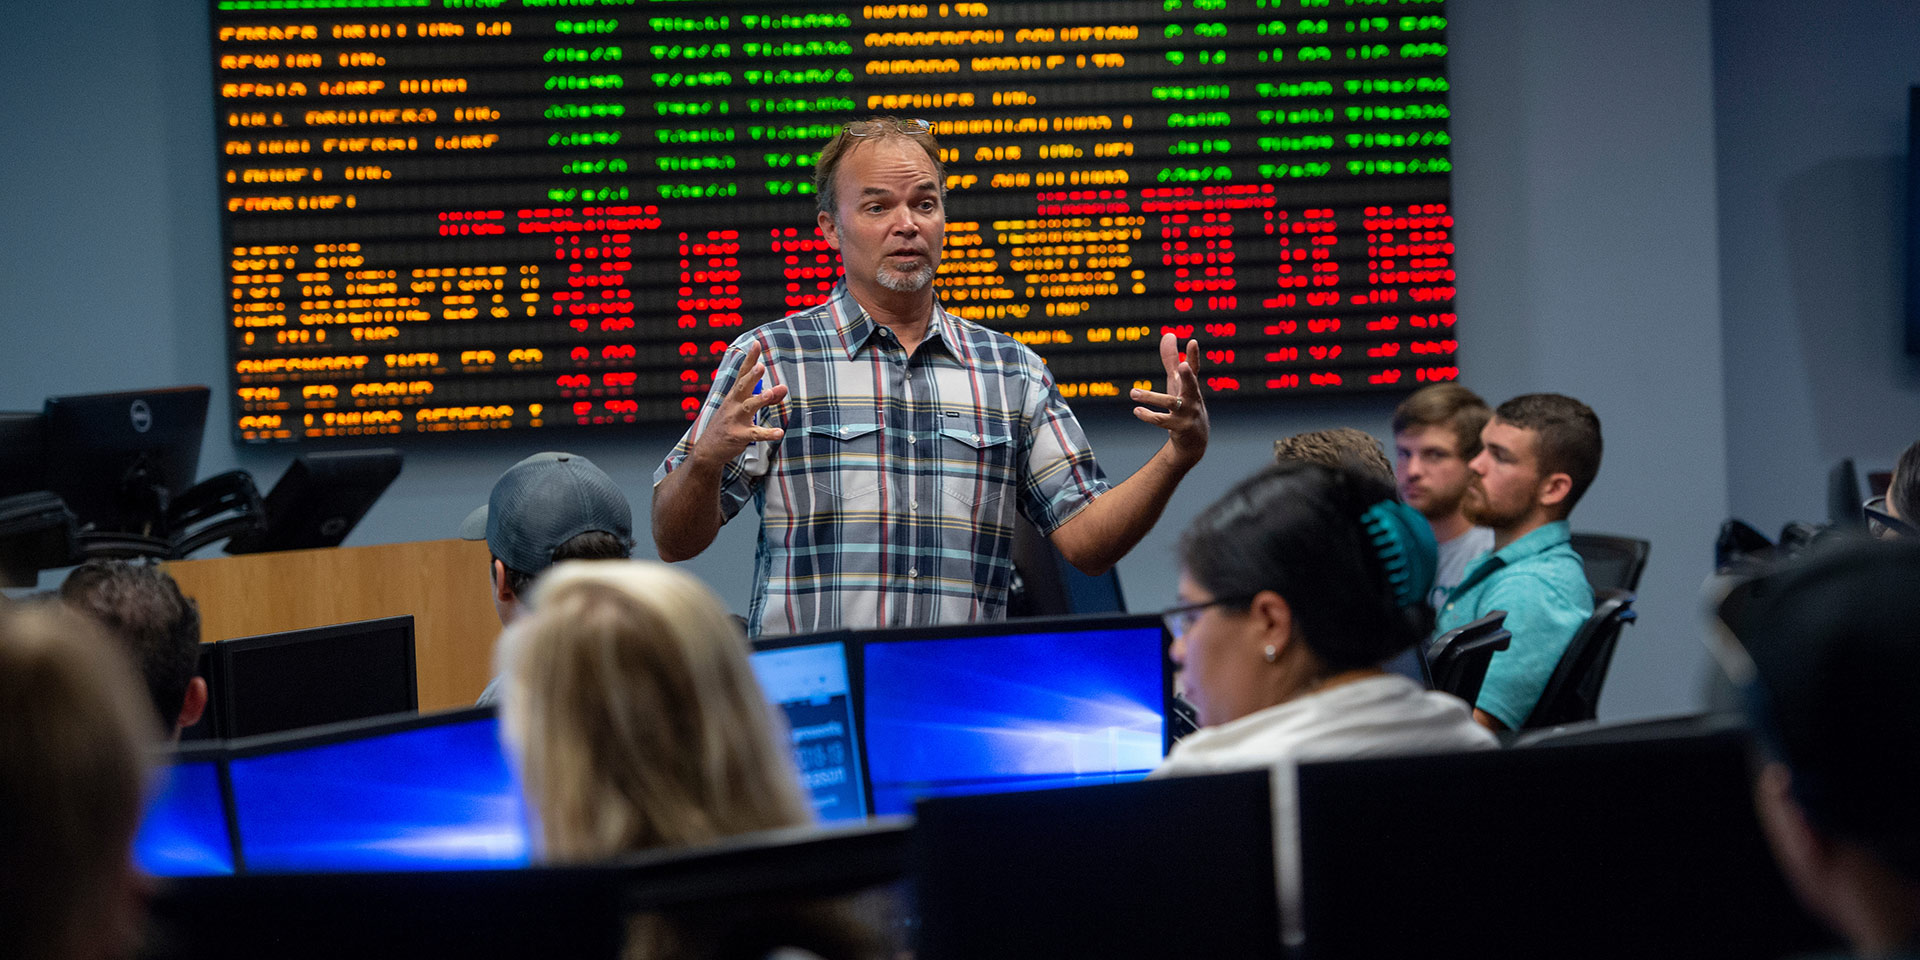 A professor gives a lecture in front of a large stock ticker board